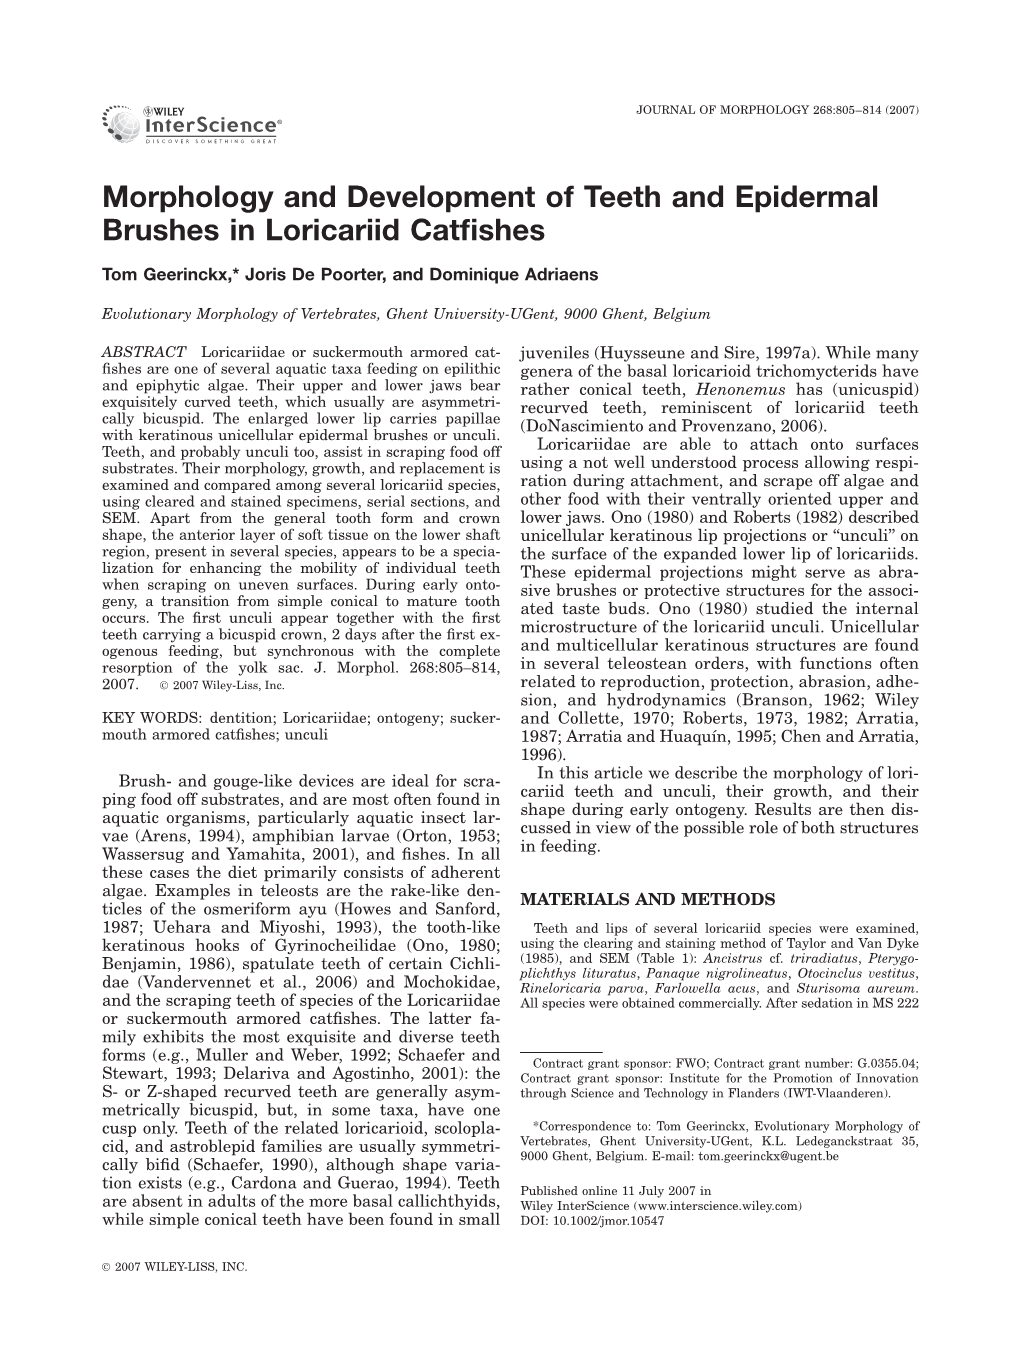 Morphology and Development of Teeth and Epidermal Brushes in Loricariid Catﬁshes